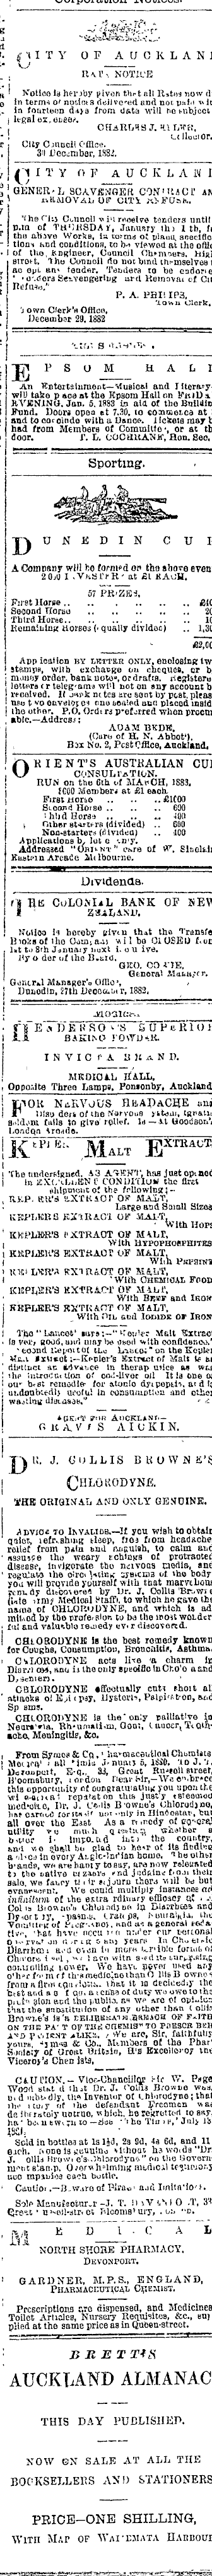 Papers Past Newspapers Auckland Star 2 January 1883 Page 3 Advertisements Column 7